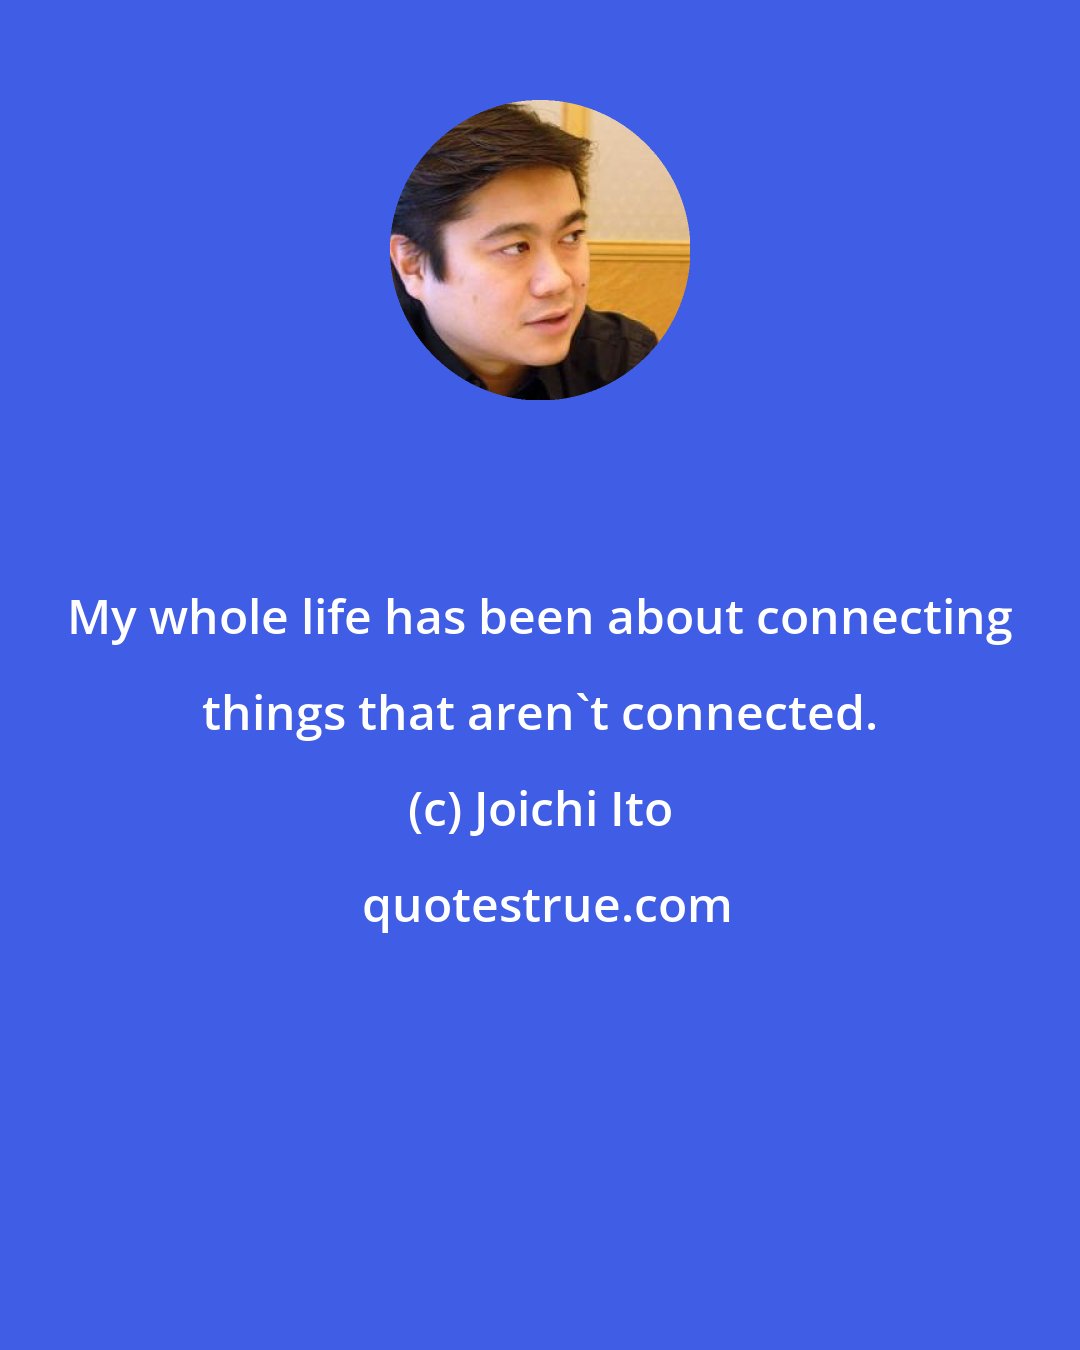 Joichi Ito: My whole life has been about connecting things that aren't connected.